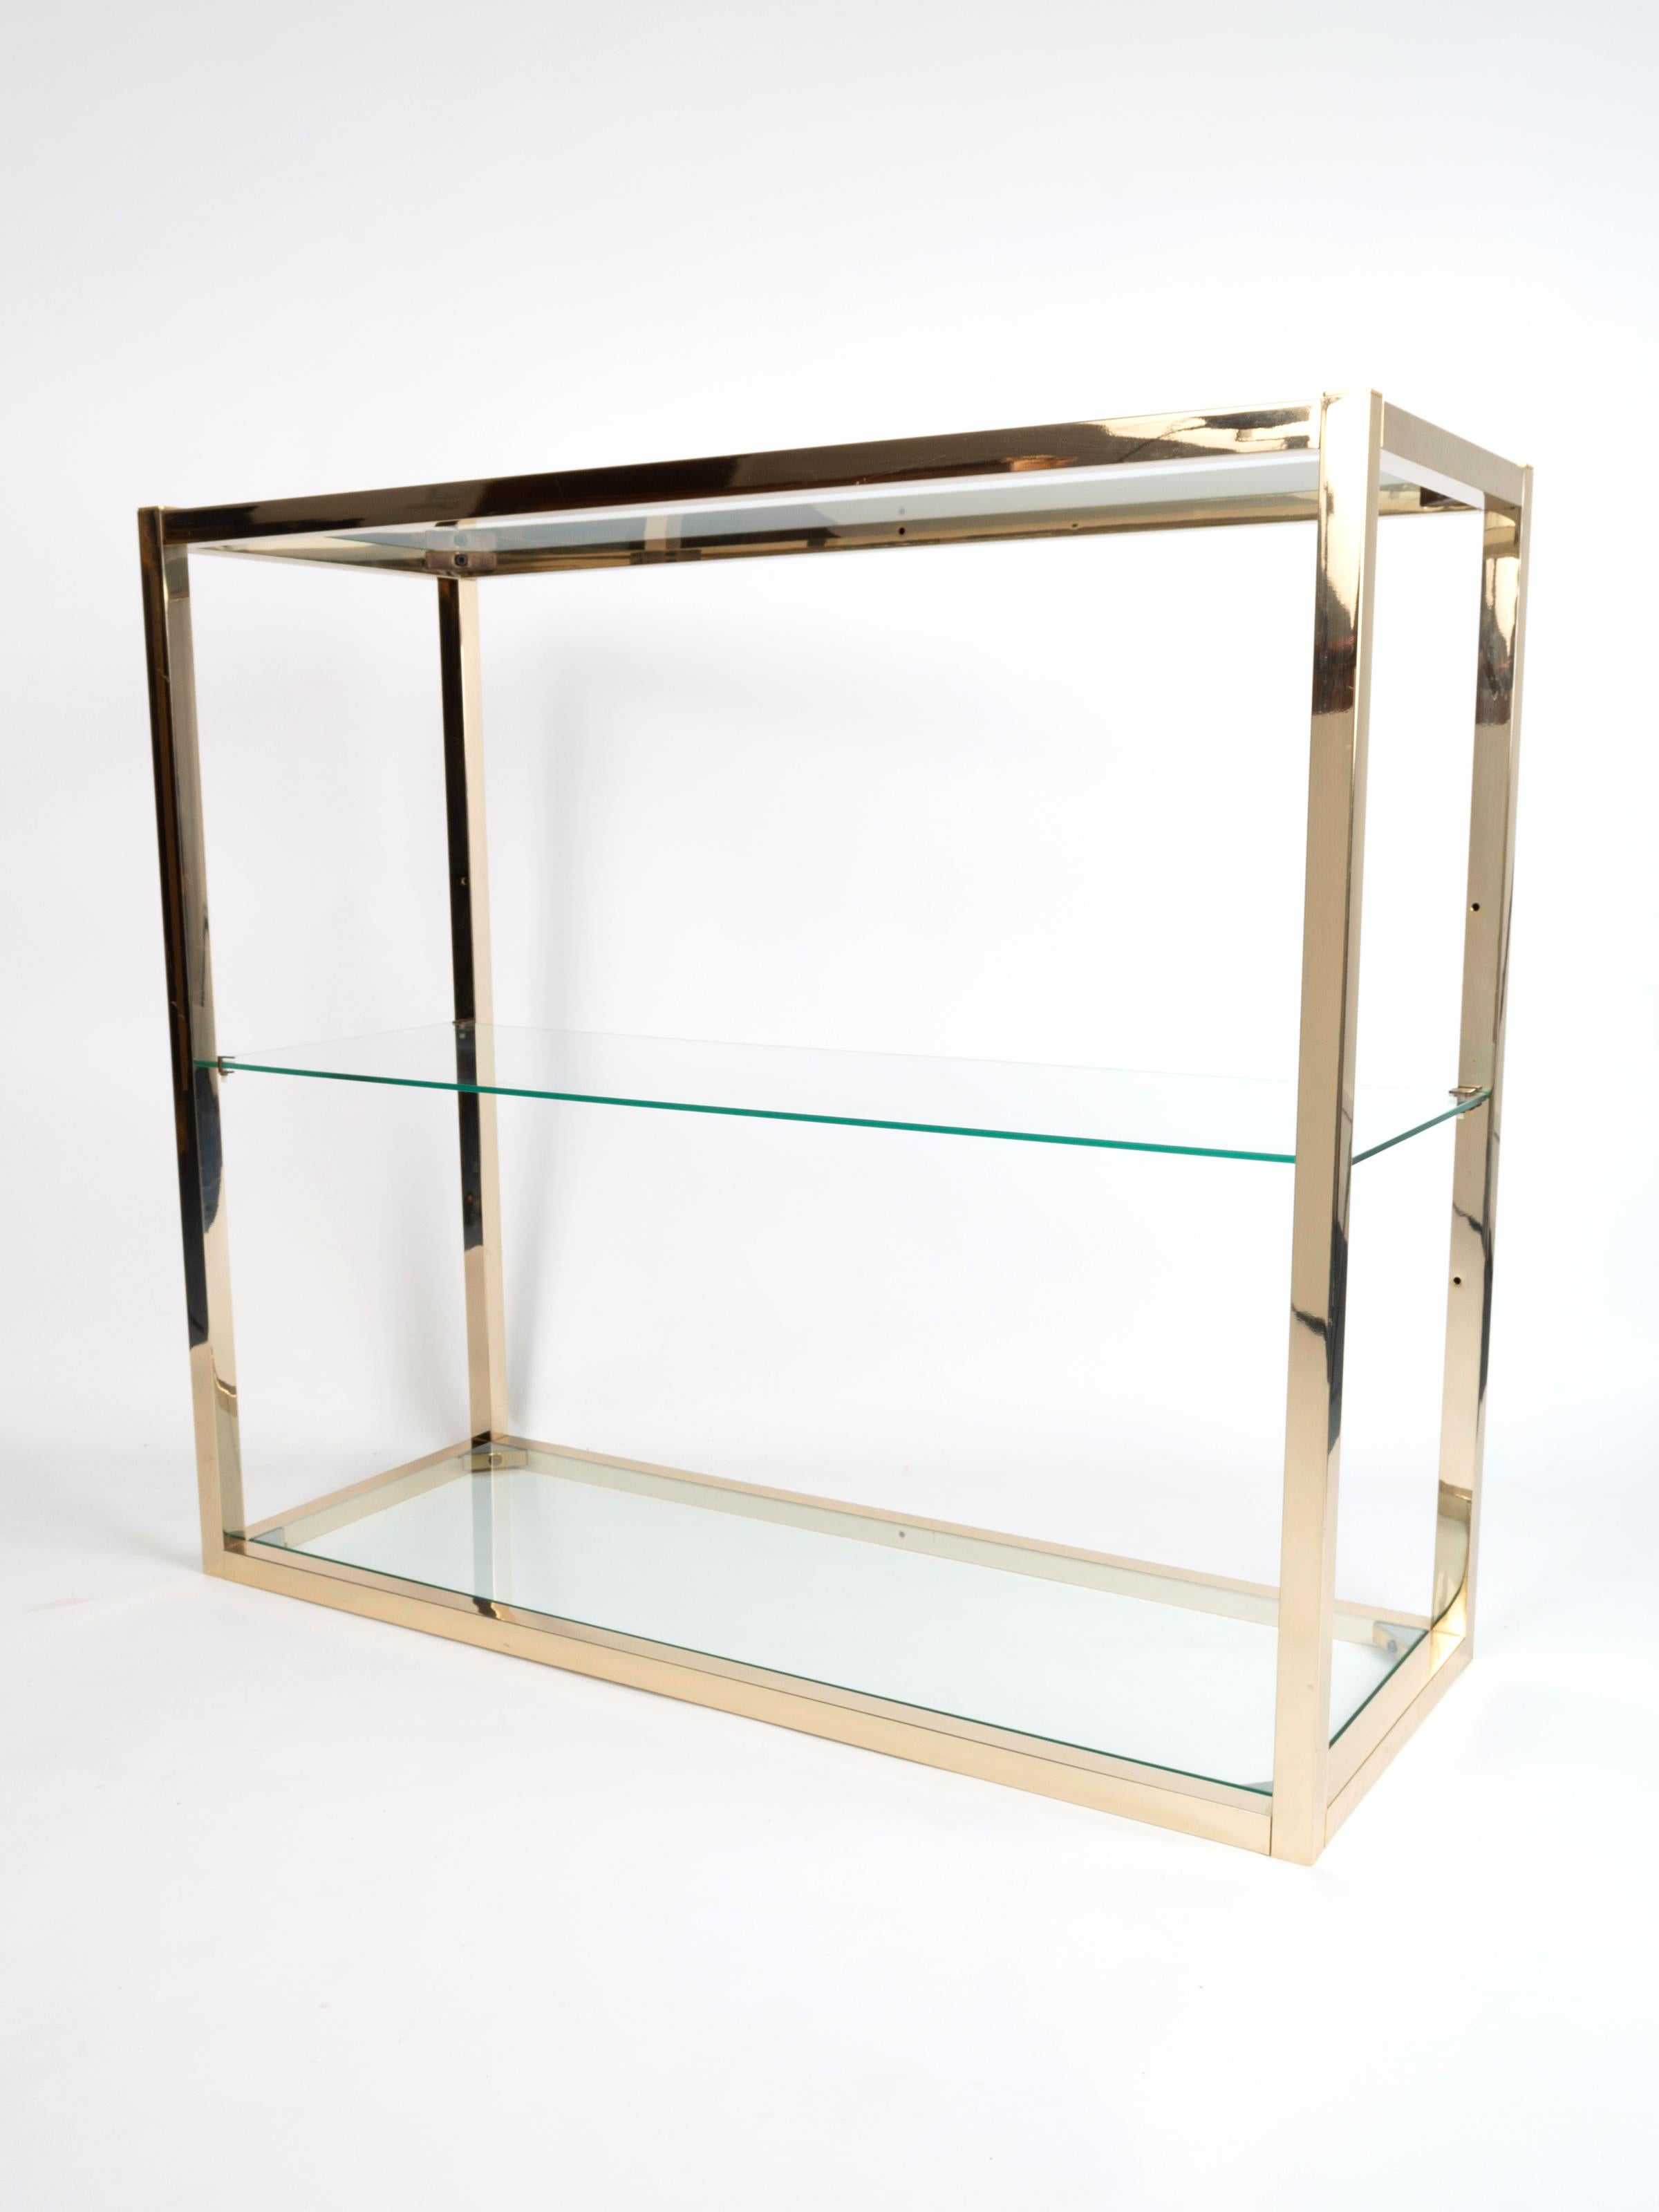 Romeo Rega Gold Plated Brass Etagere Shelving Console, Italy, C.1960 In Good Condition For Sale In London, GB